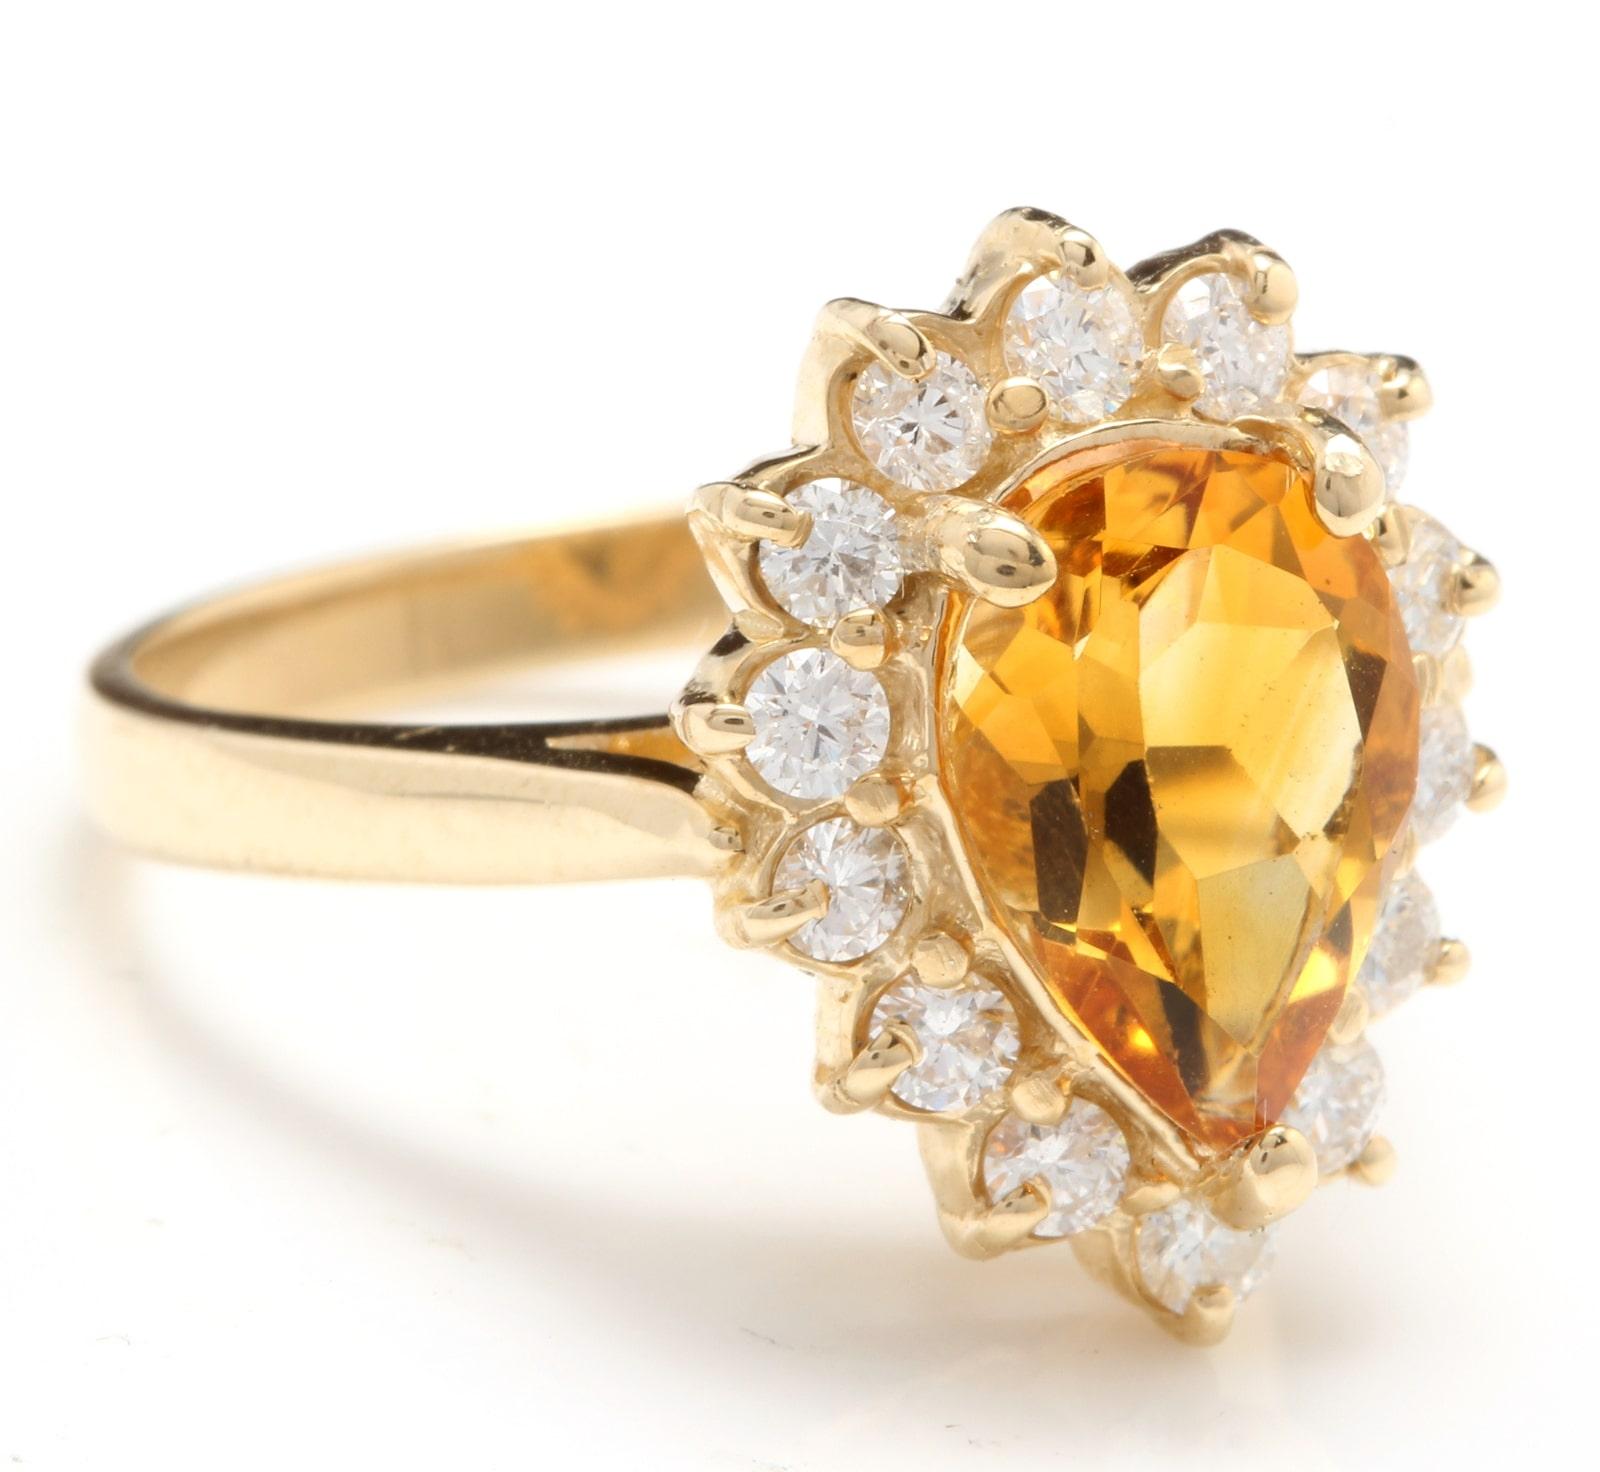 2.70 Carats Natural Very Nice Looking Citrine and Diamond 14K Solid Yellow Gold Ring

Total Natural Pear Shaped Citrine Weight is: Approx. 2.00 Carats

Citrine Measures: Approx. 11 x 7mm

Natural Round Diamonds Weight: Approx. 0.70 Carats (color G-H